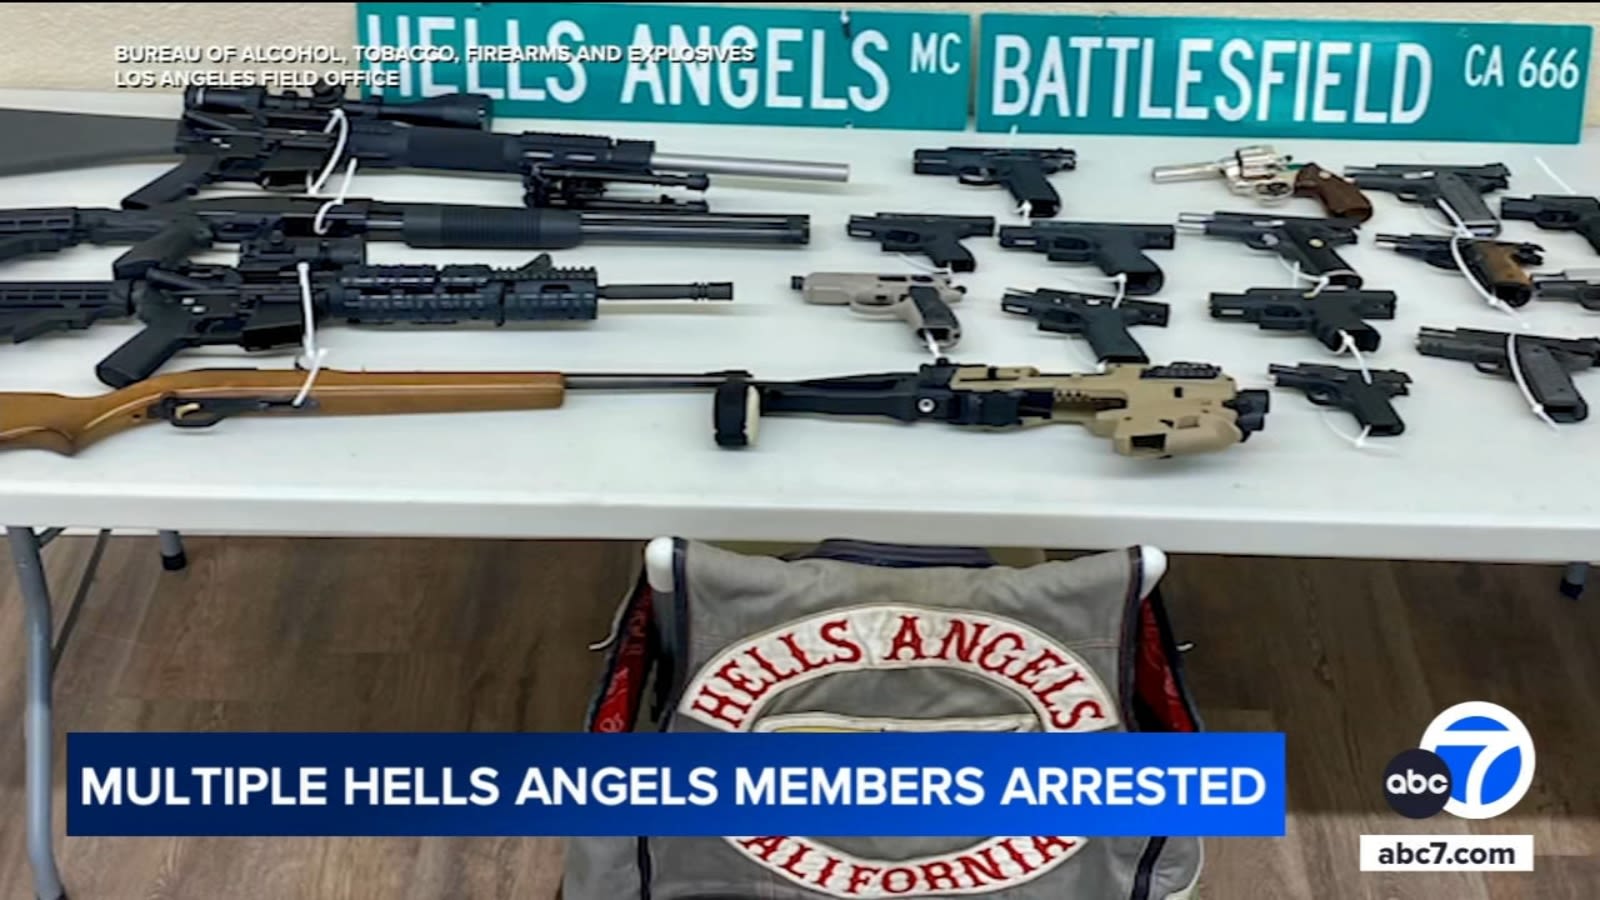 Entire Bakersfield chapter of Hells Angels arrested in multi-agency investigation